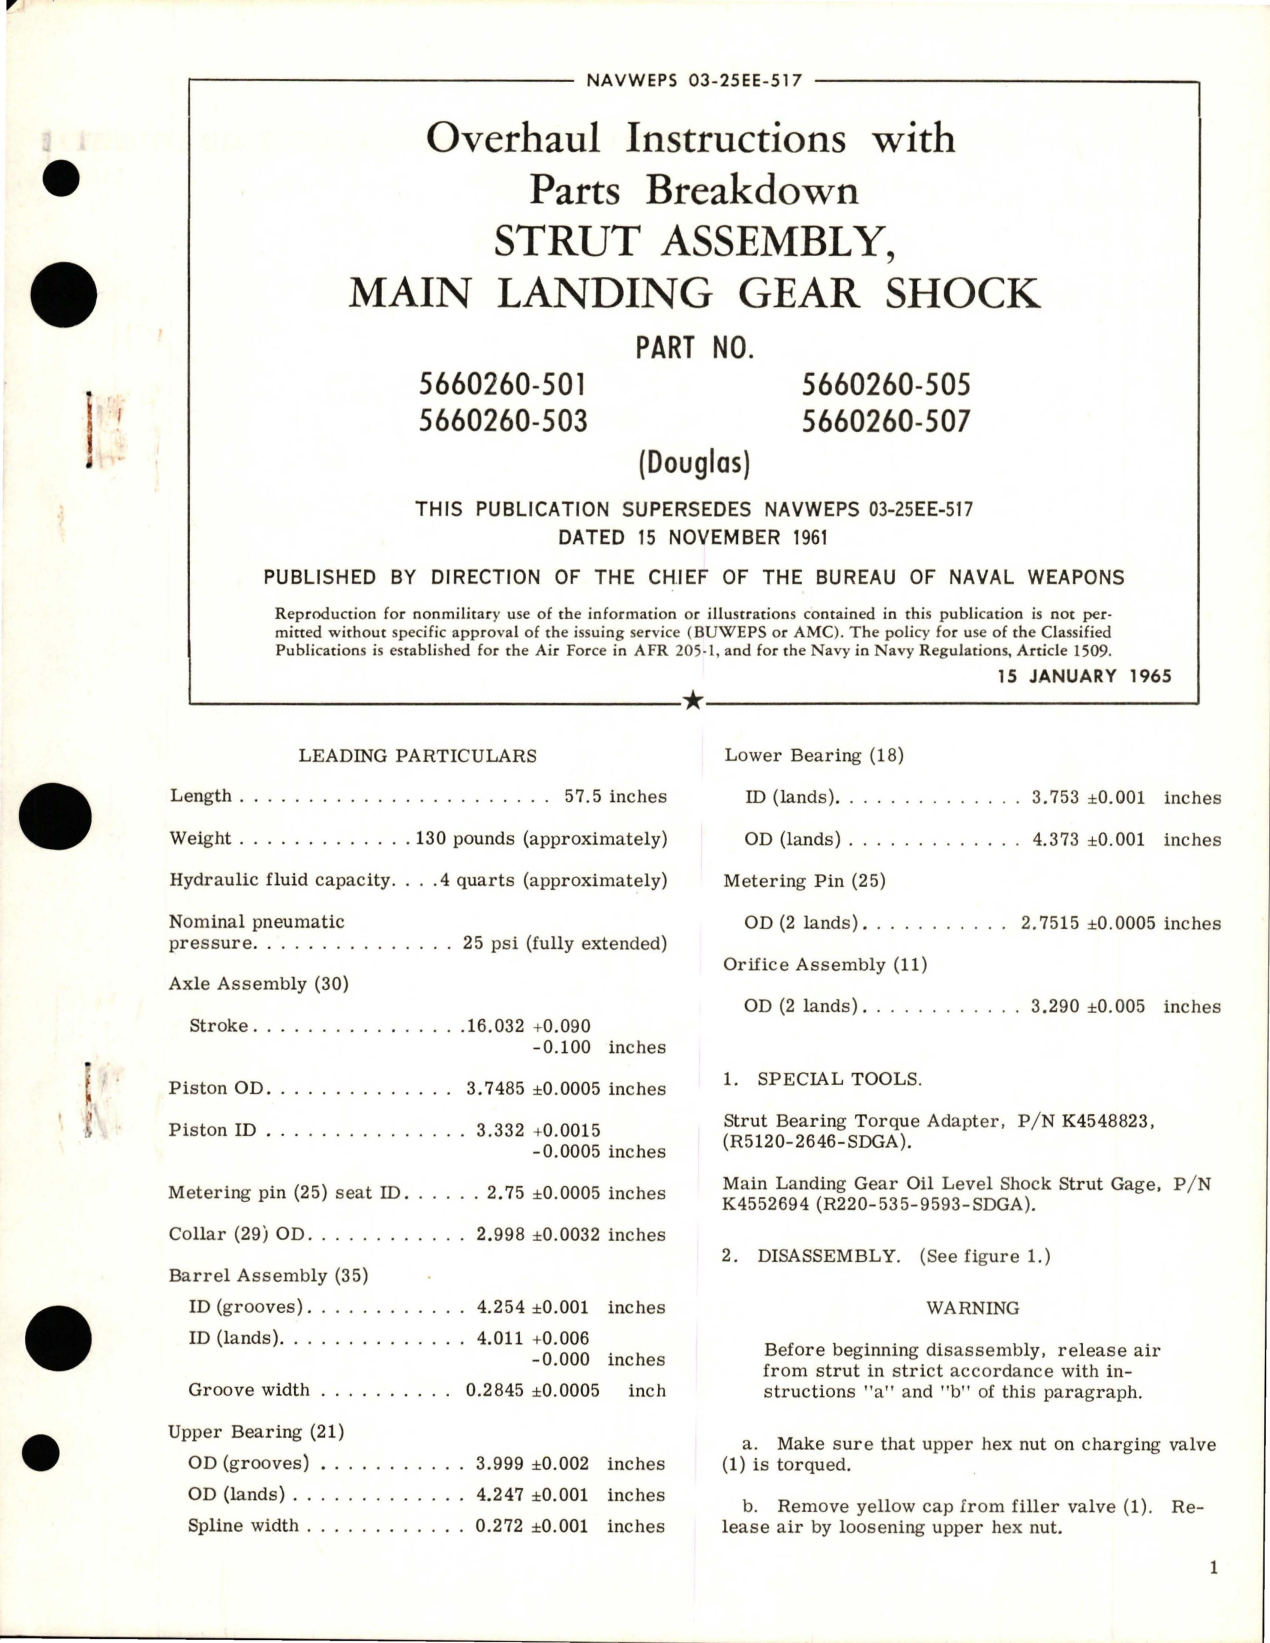 Sample page 1 from AirCorps Library document: Overhaul Instructions with Parts Breakdown for Main Landing Gear Shock Strut Assembly